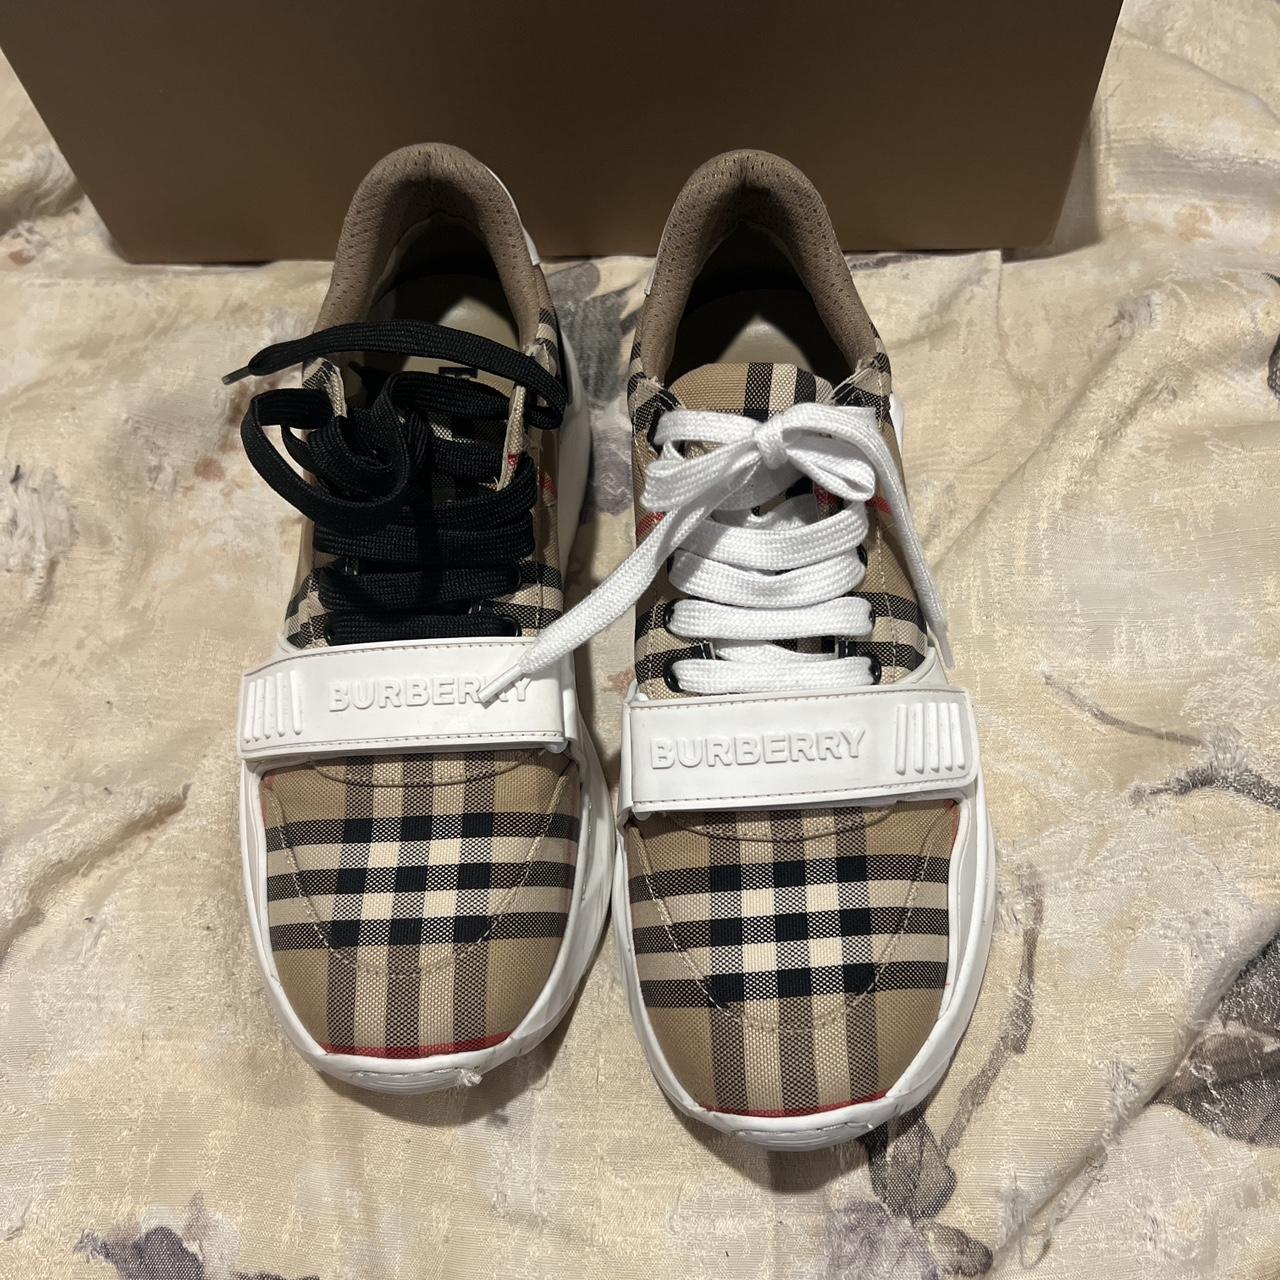 Burberry shoes size 7(40). Good condition. Comes